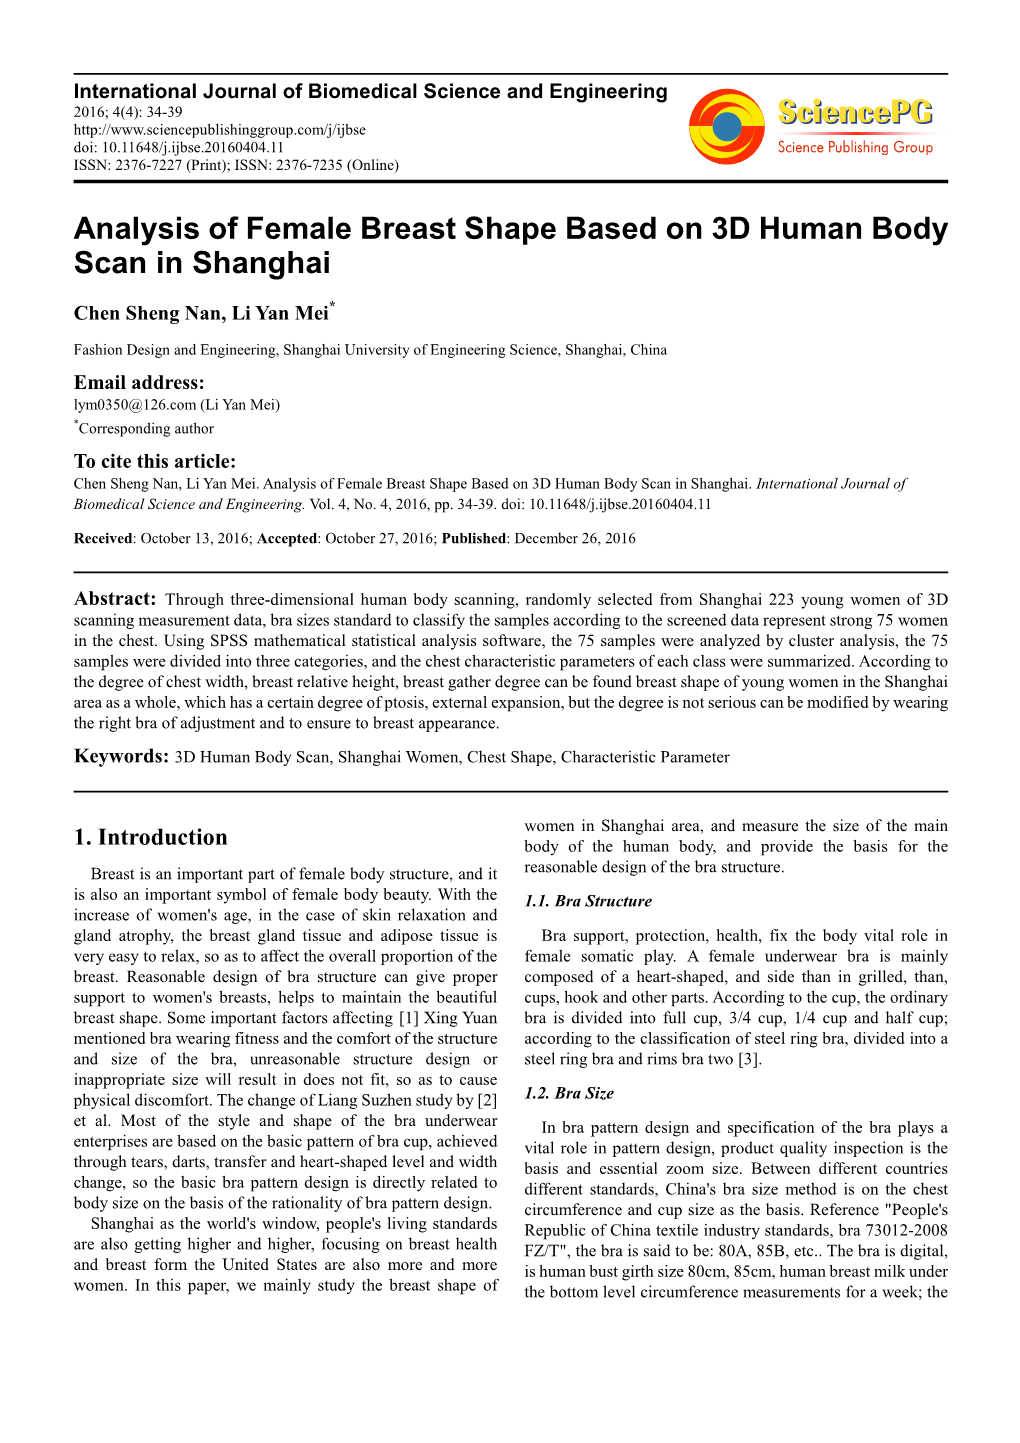 Analysis of Female Breast Shape Based on 3D Human Body Scan in Shanghai